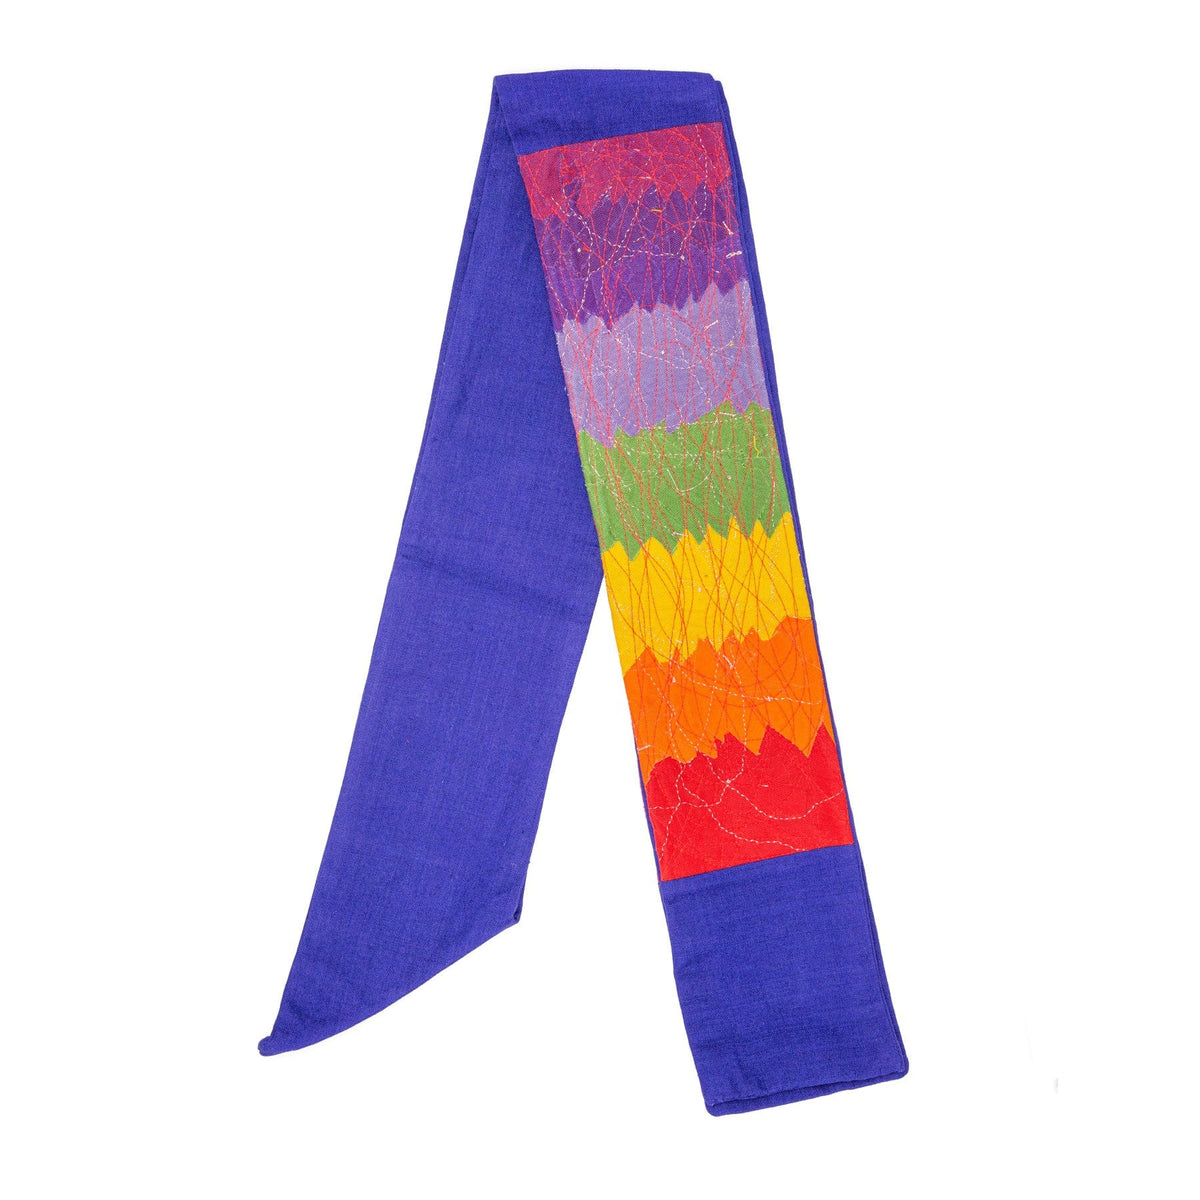 Rainbow and Blue Contemporary Clergy Stole